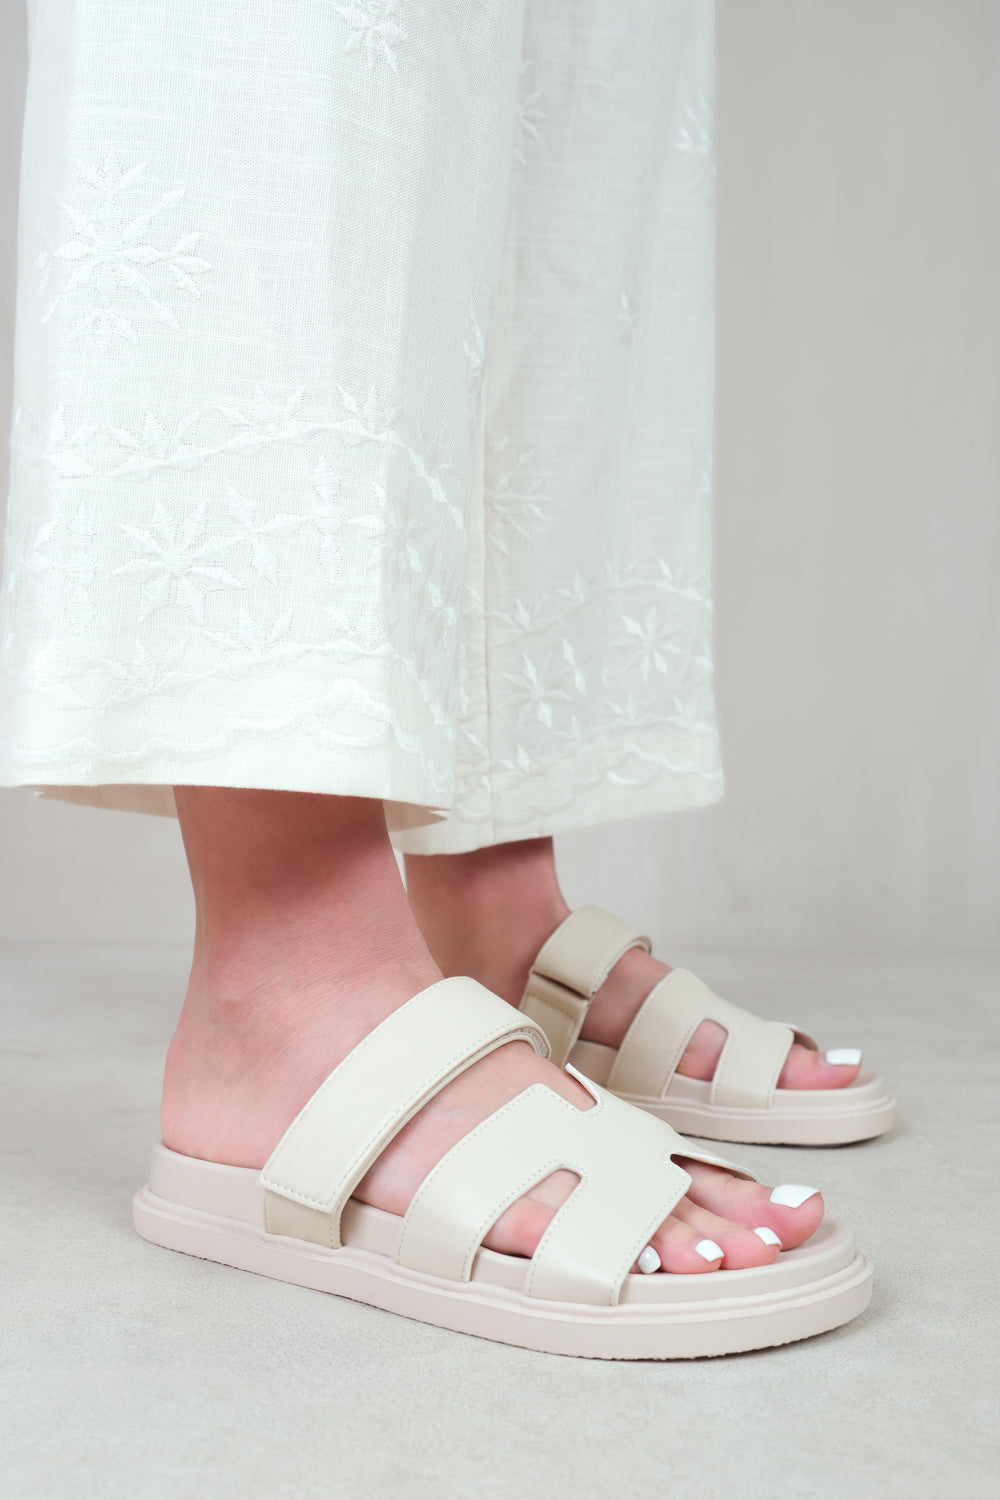 ADAGIO STRAPPY SANDALS IN NUDE FAUX LEATHER